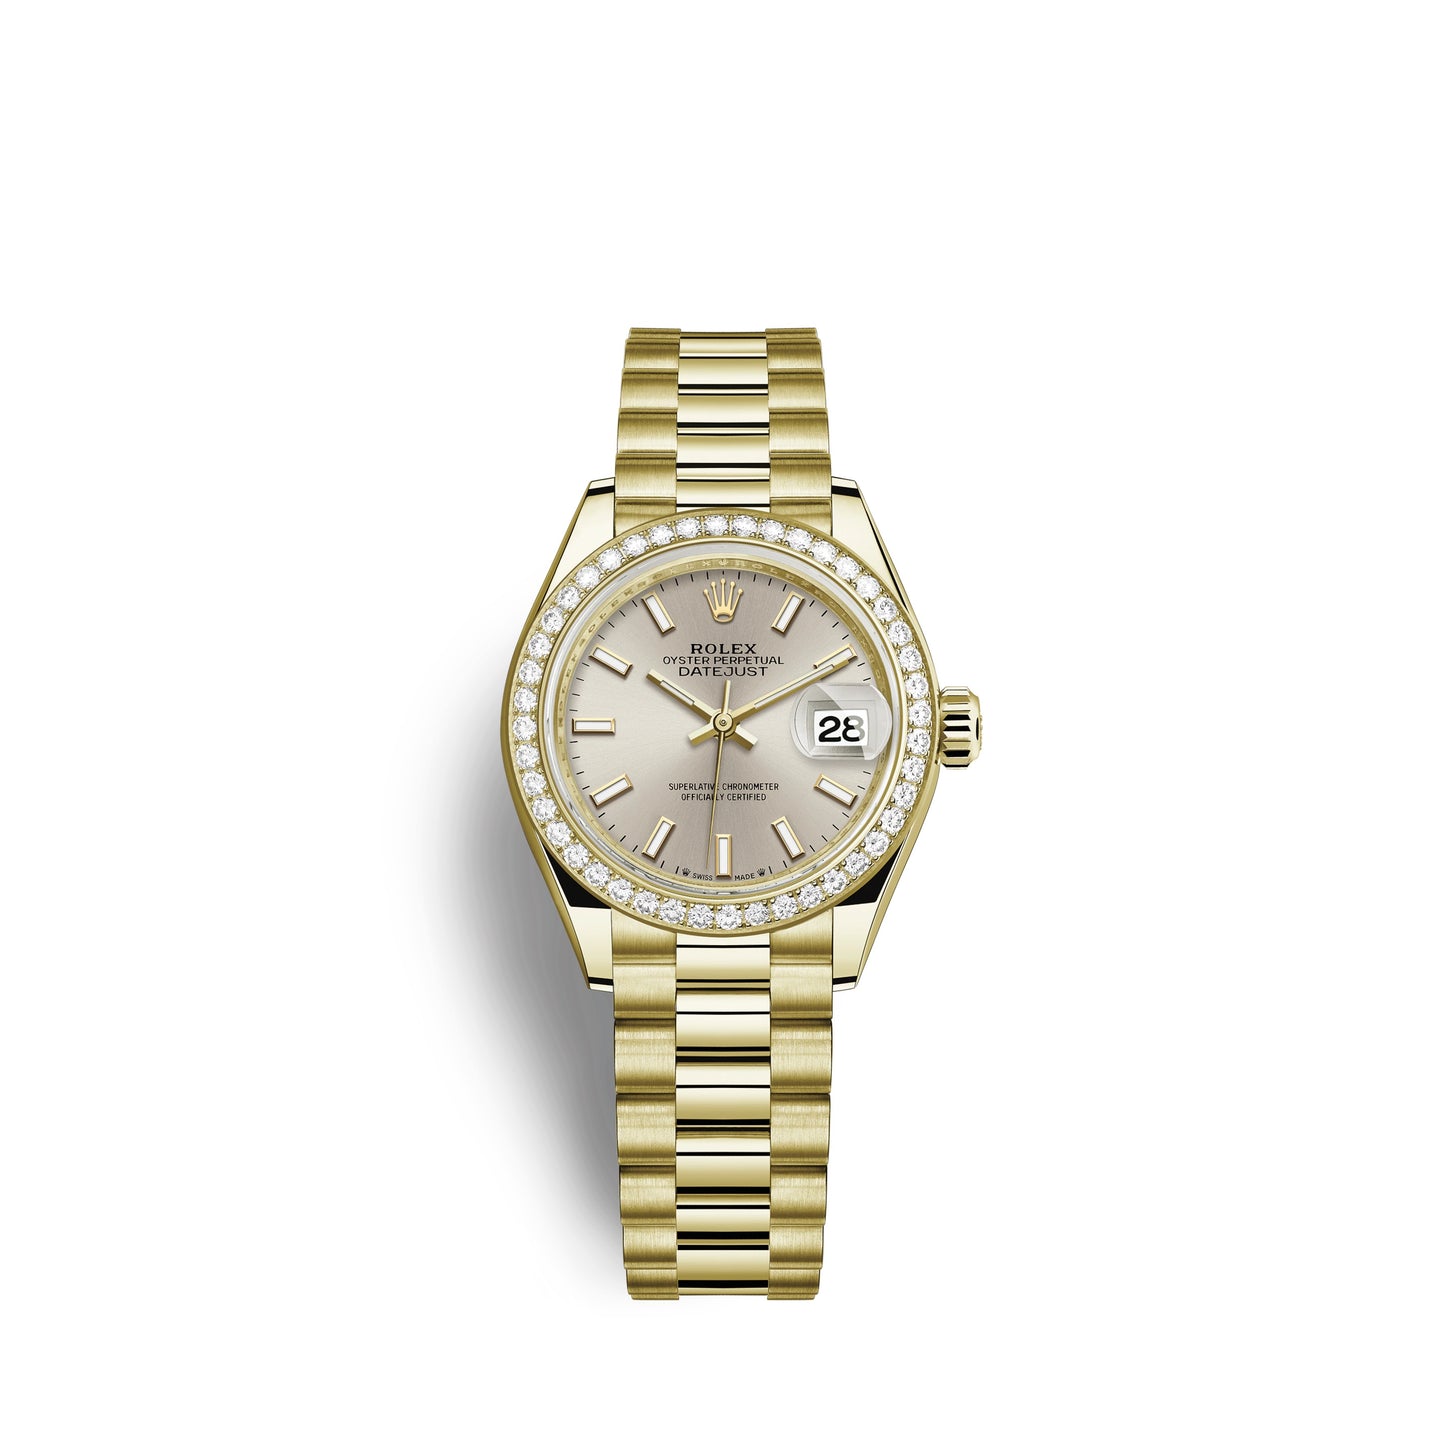 Rolex Lady-Datejust 28, 18kt Yellow Gold and diamonds, Ref# 279138RBR-0005